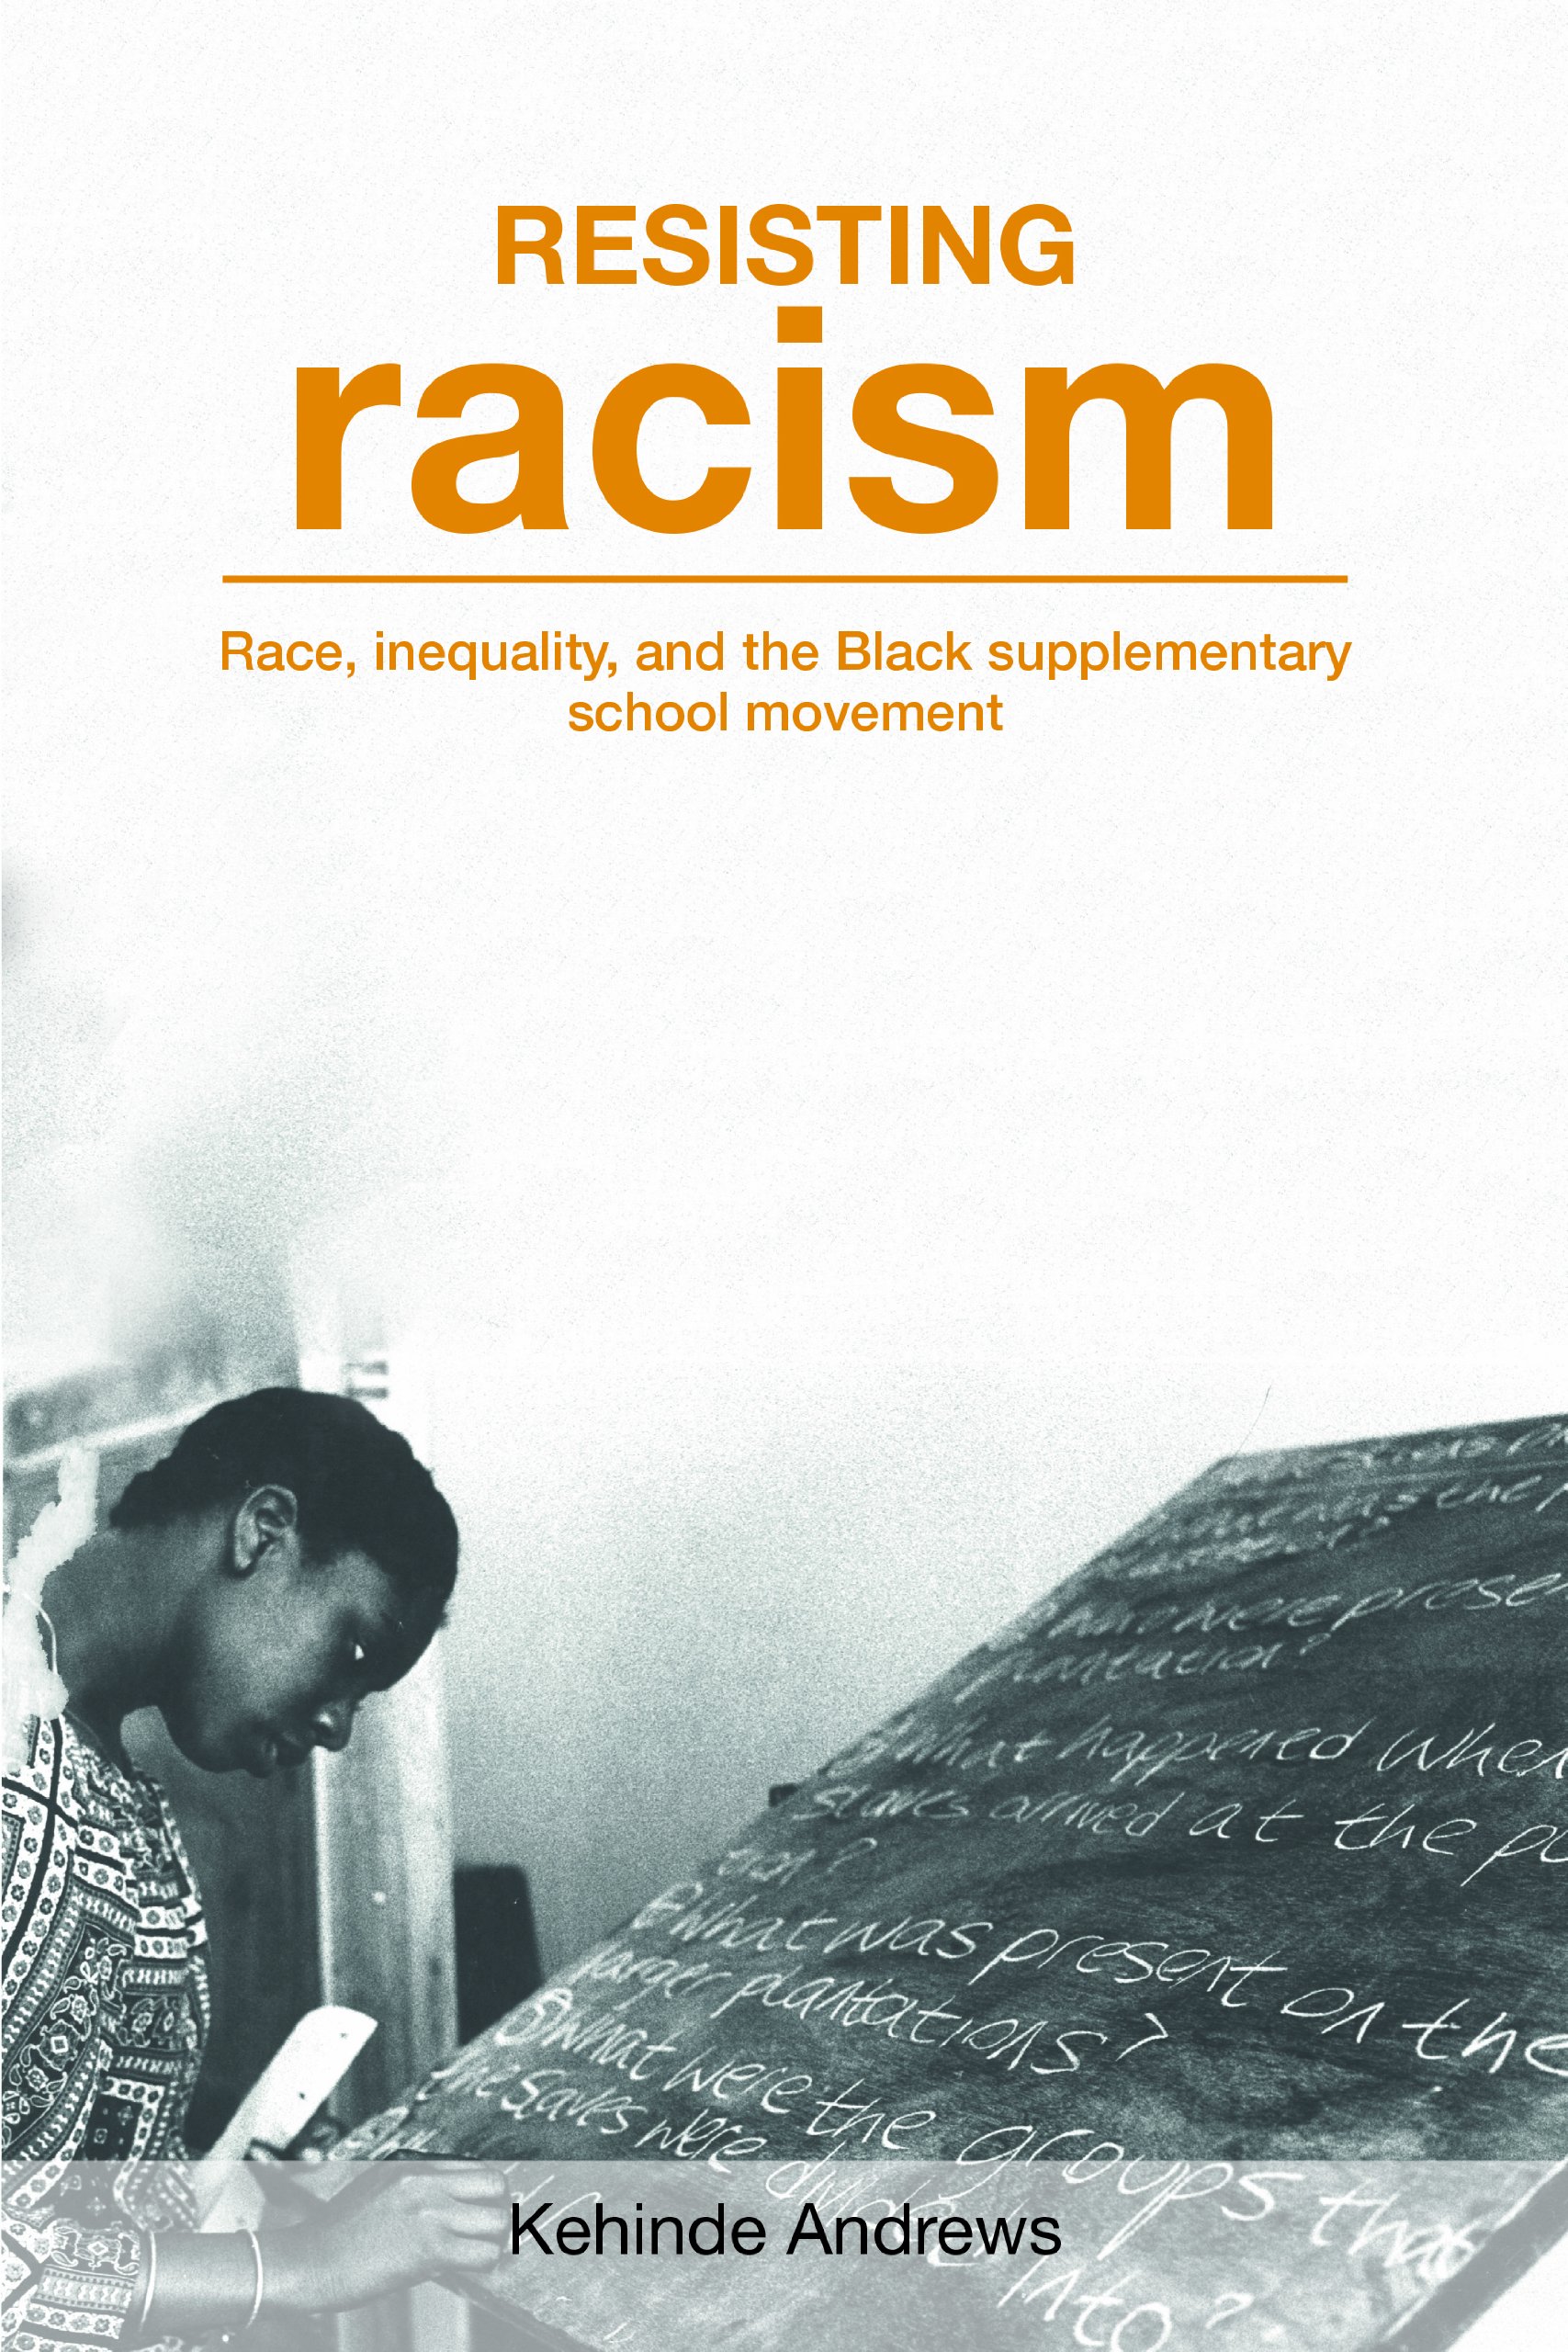 Back to Black: Retelling Black Radicalism for the 21st Century: Blackness  in Britain Kehinde Andrews Zed Books